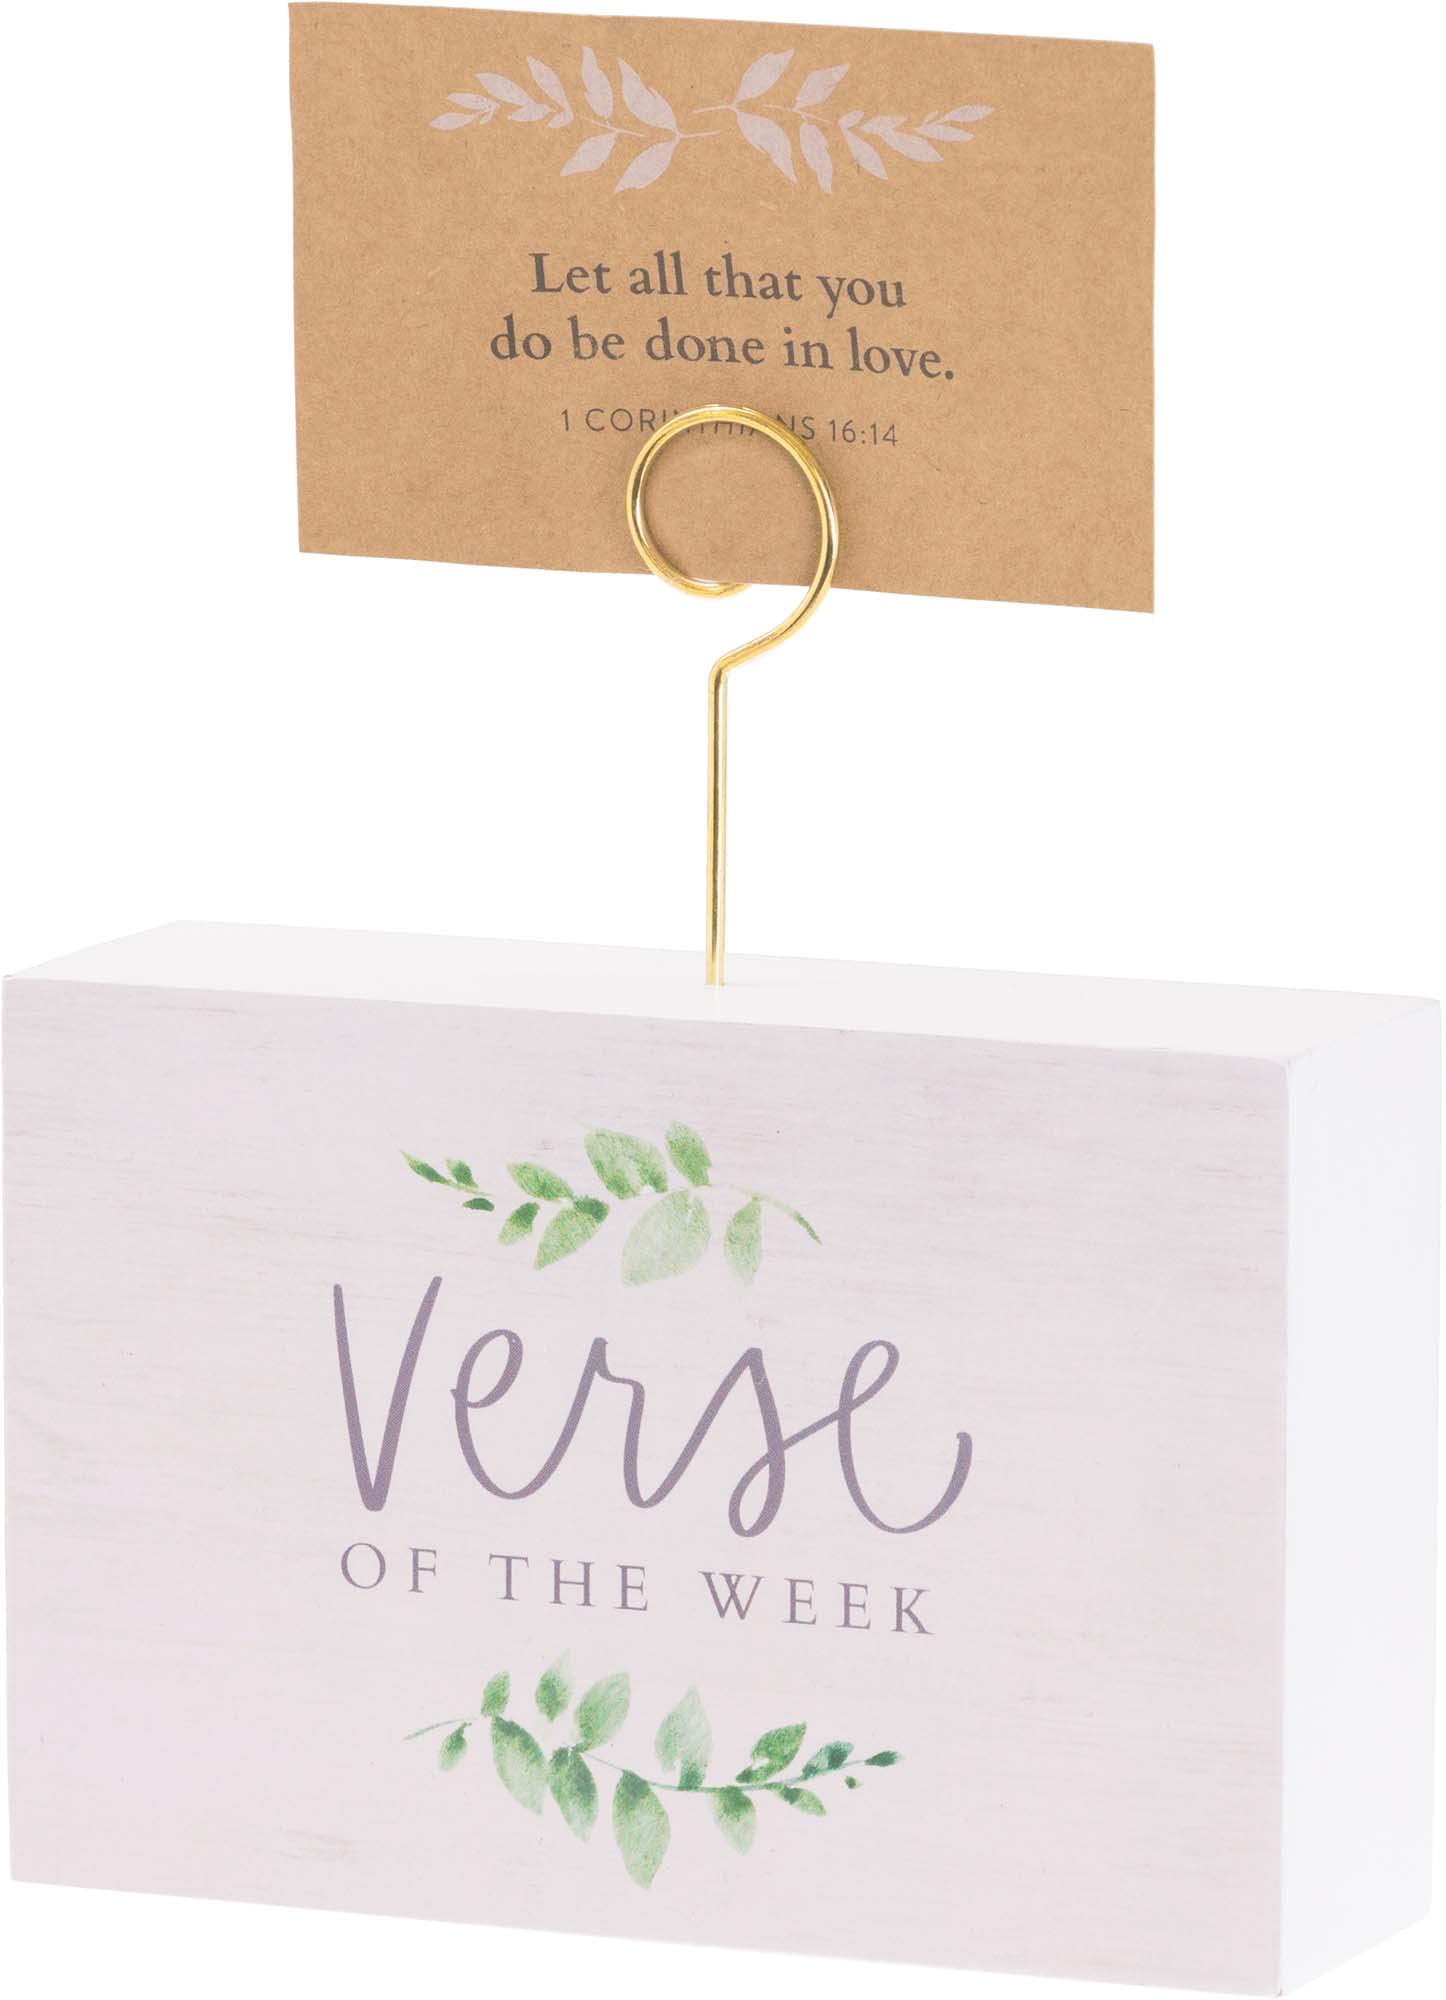 Eccolo Heatherlee Chan Desk Stand Verse of the Week Product Image